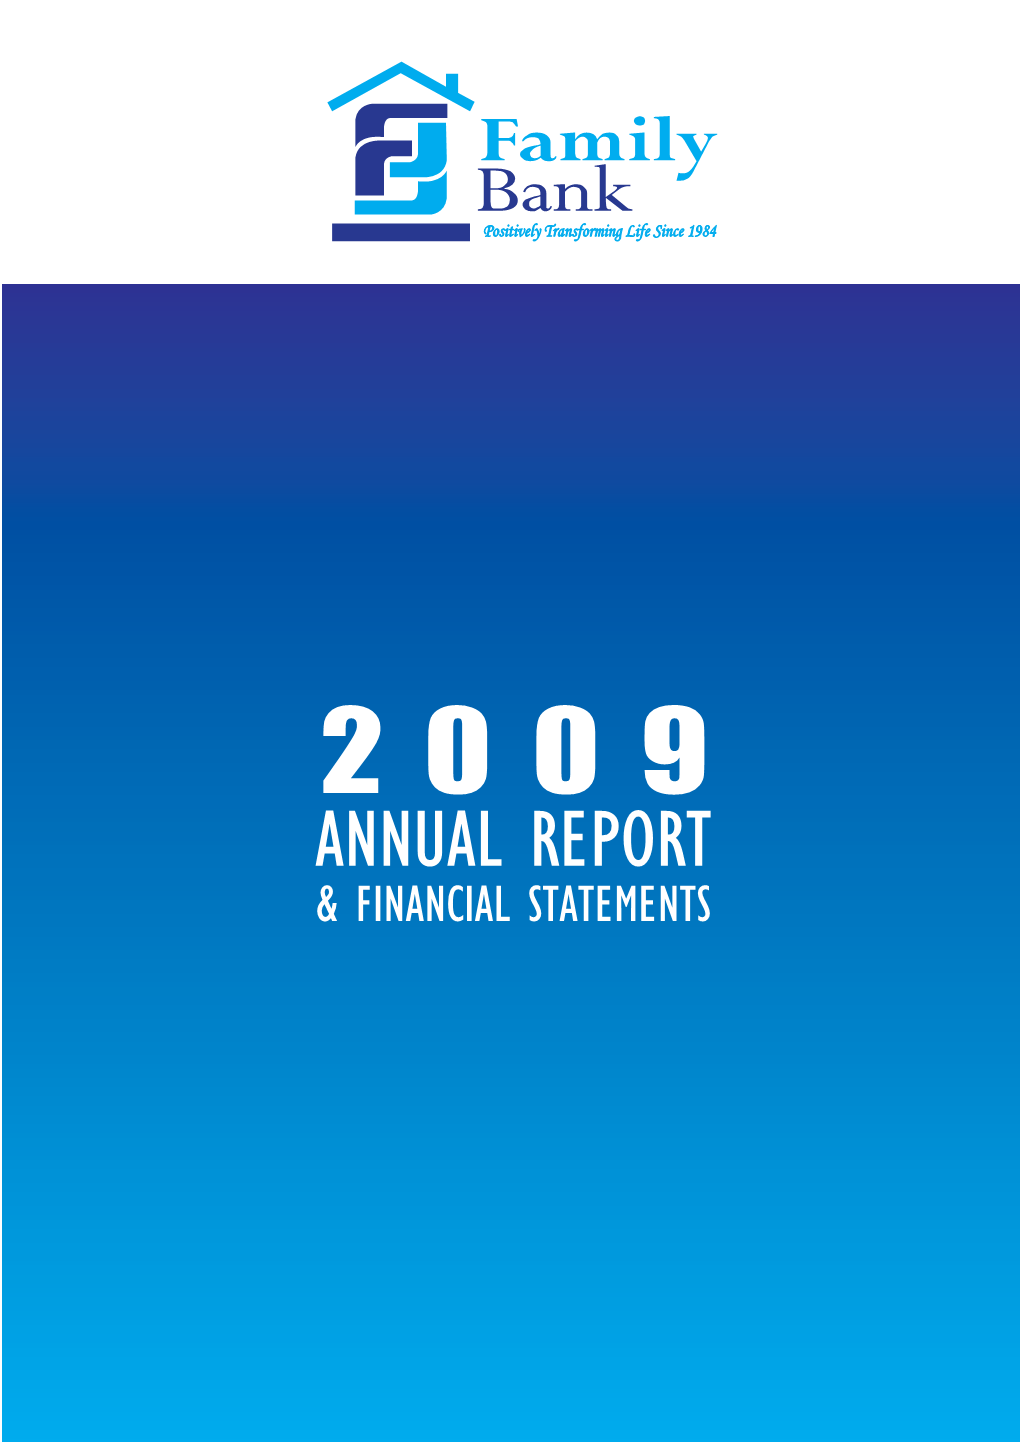 Annual Report & Financial Statements 2009